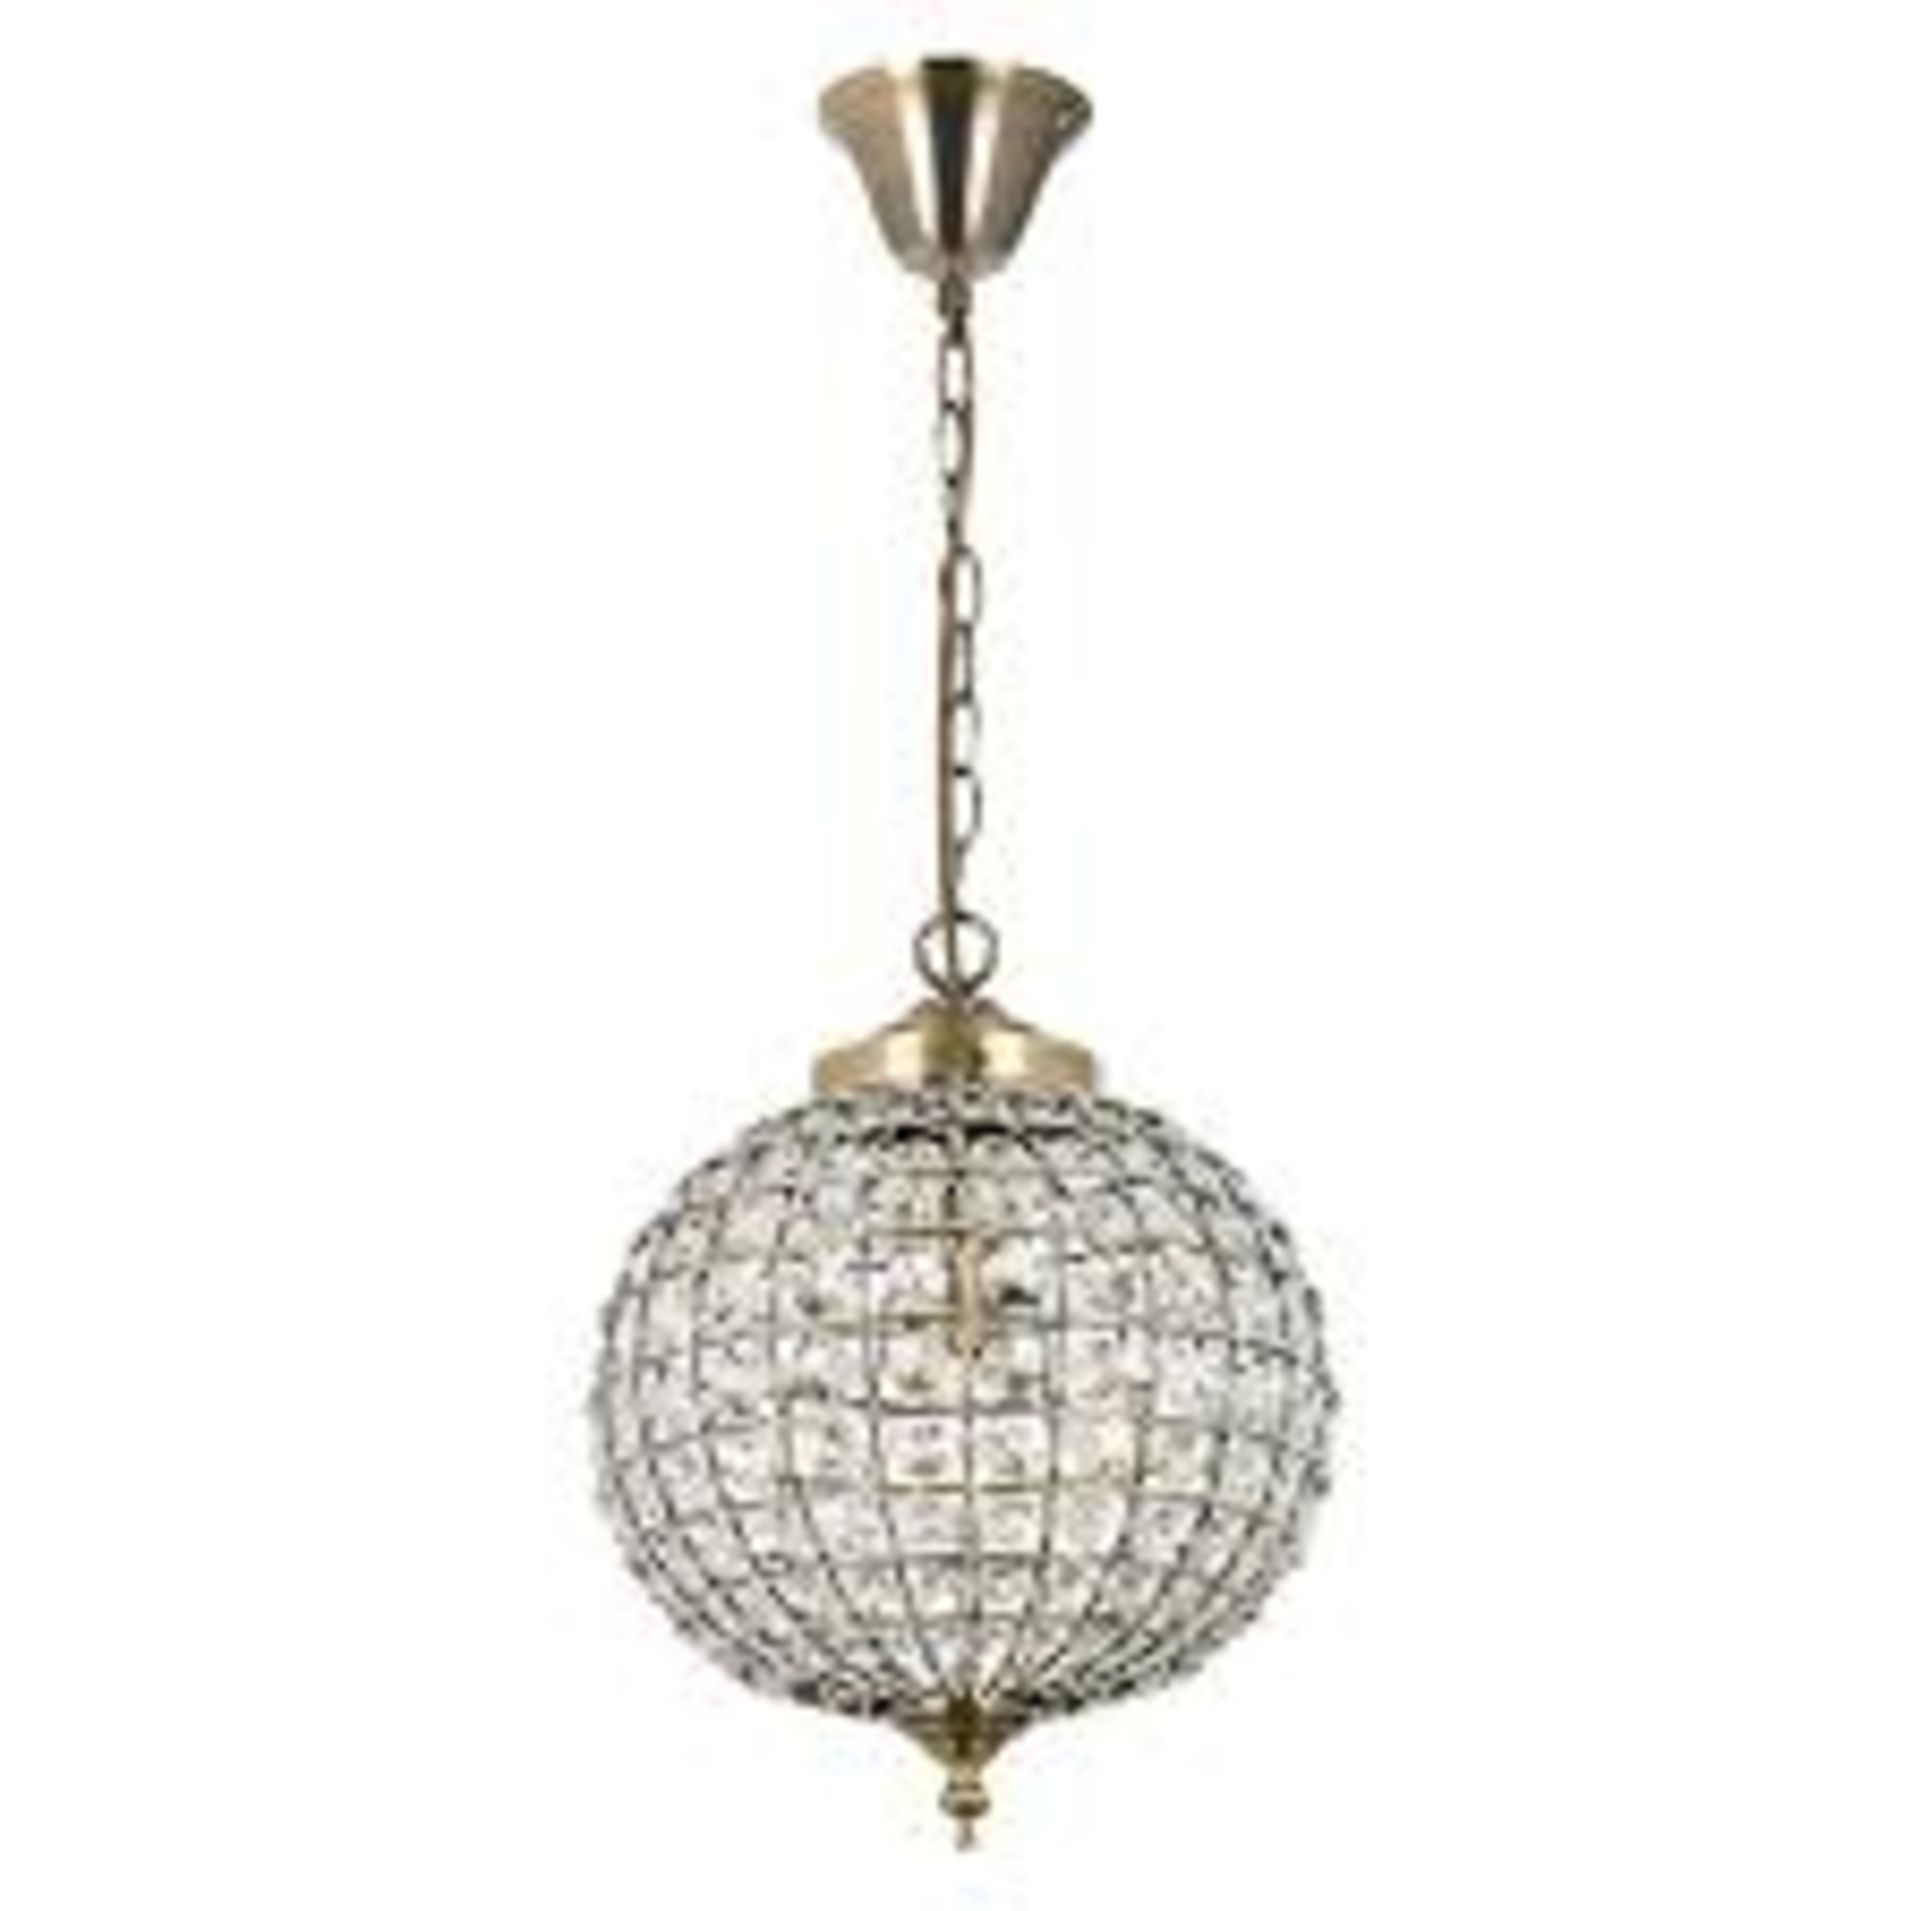 Boxed Endon Lighting Dema Antique Brass and Glass Ceiling Light Fitting (Viewing/Appraisals Highly